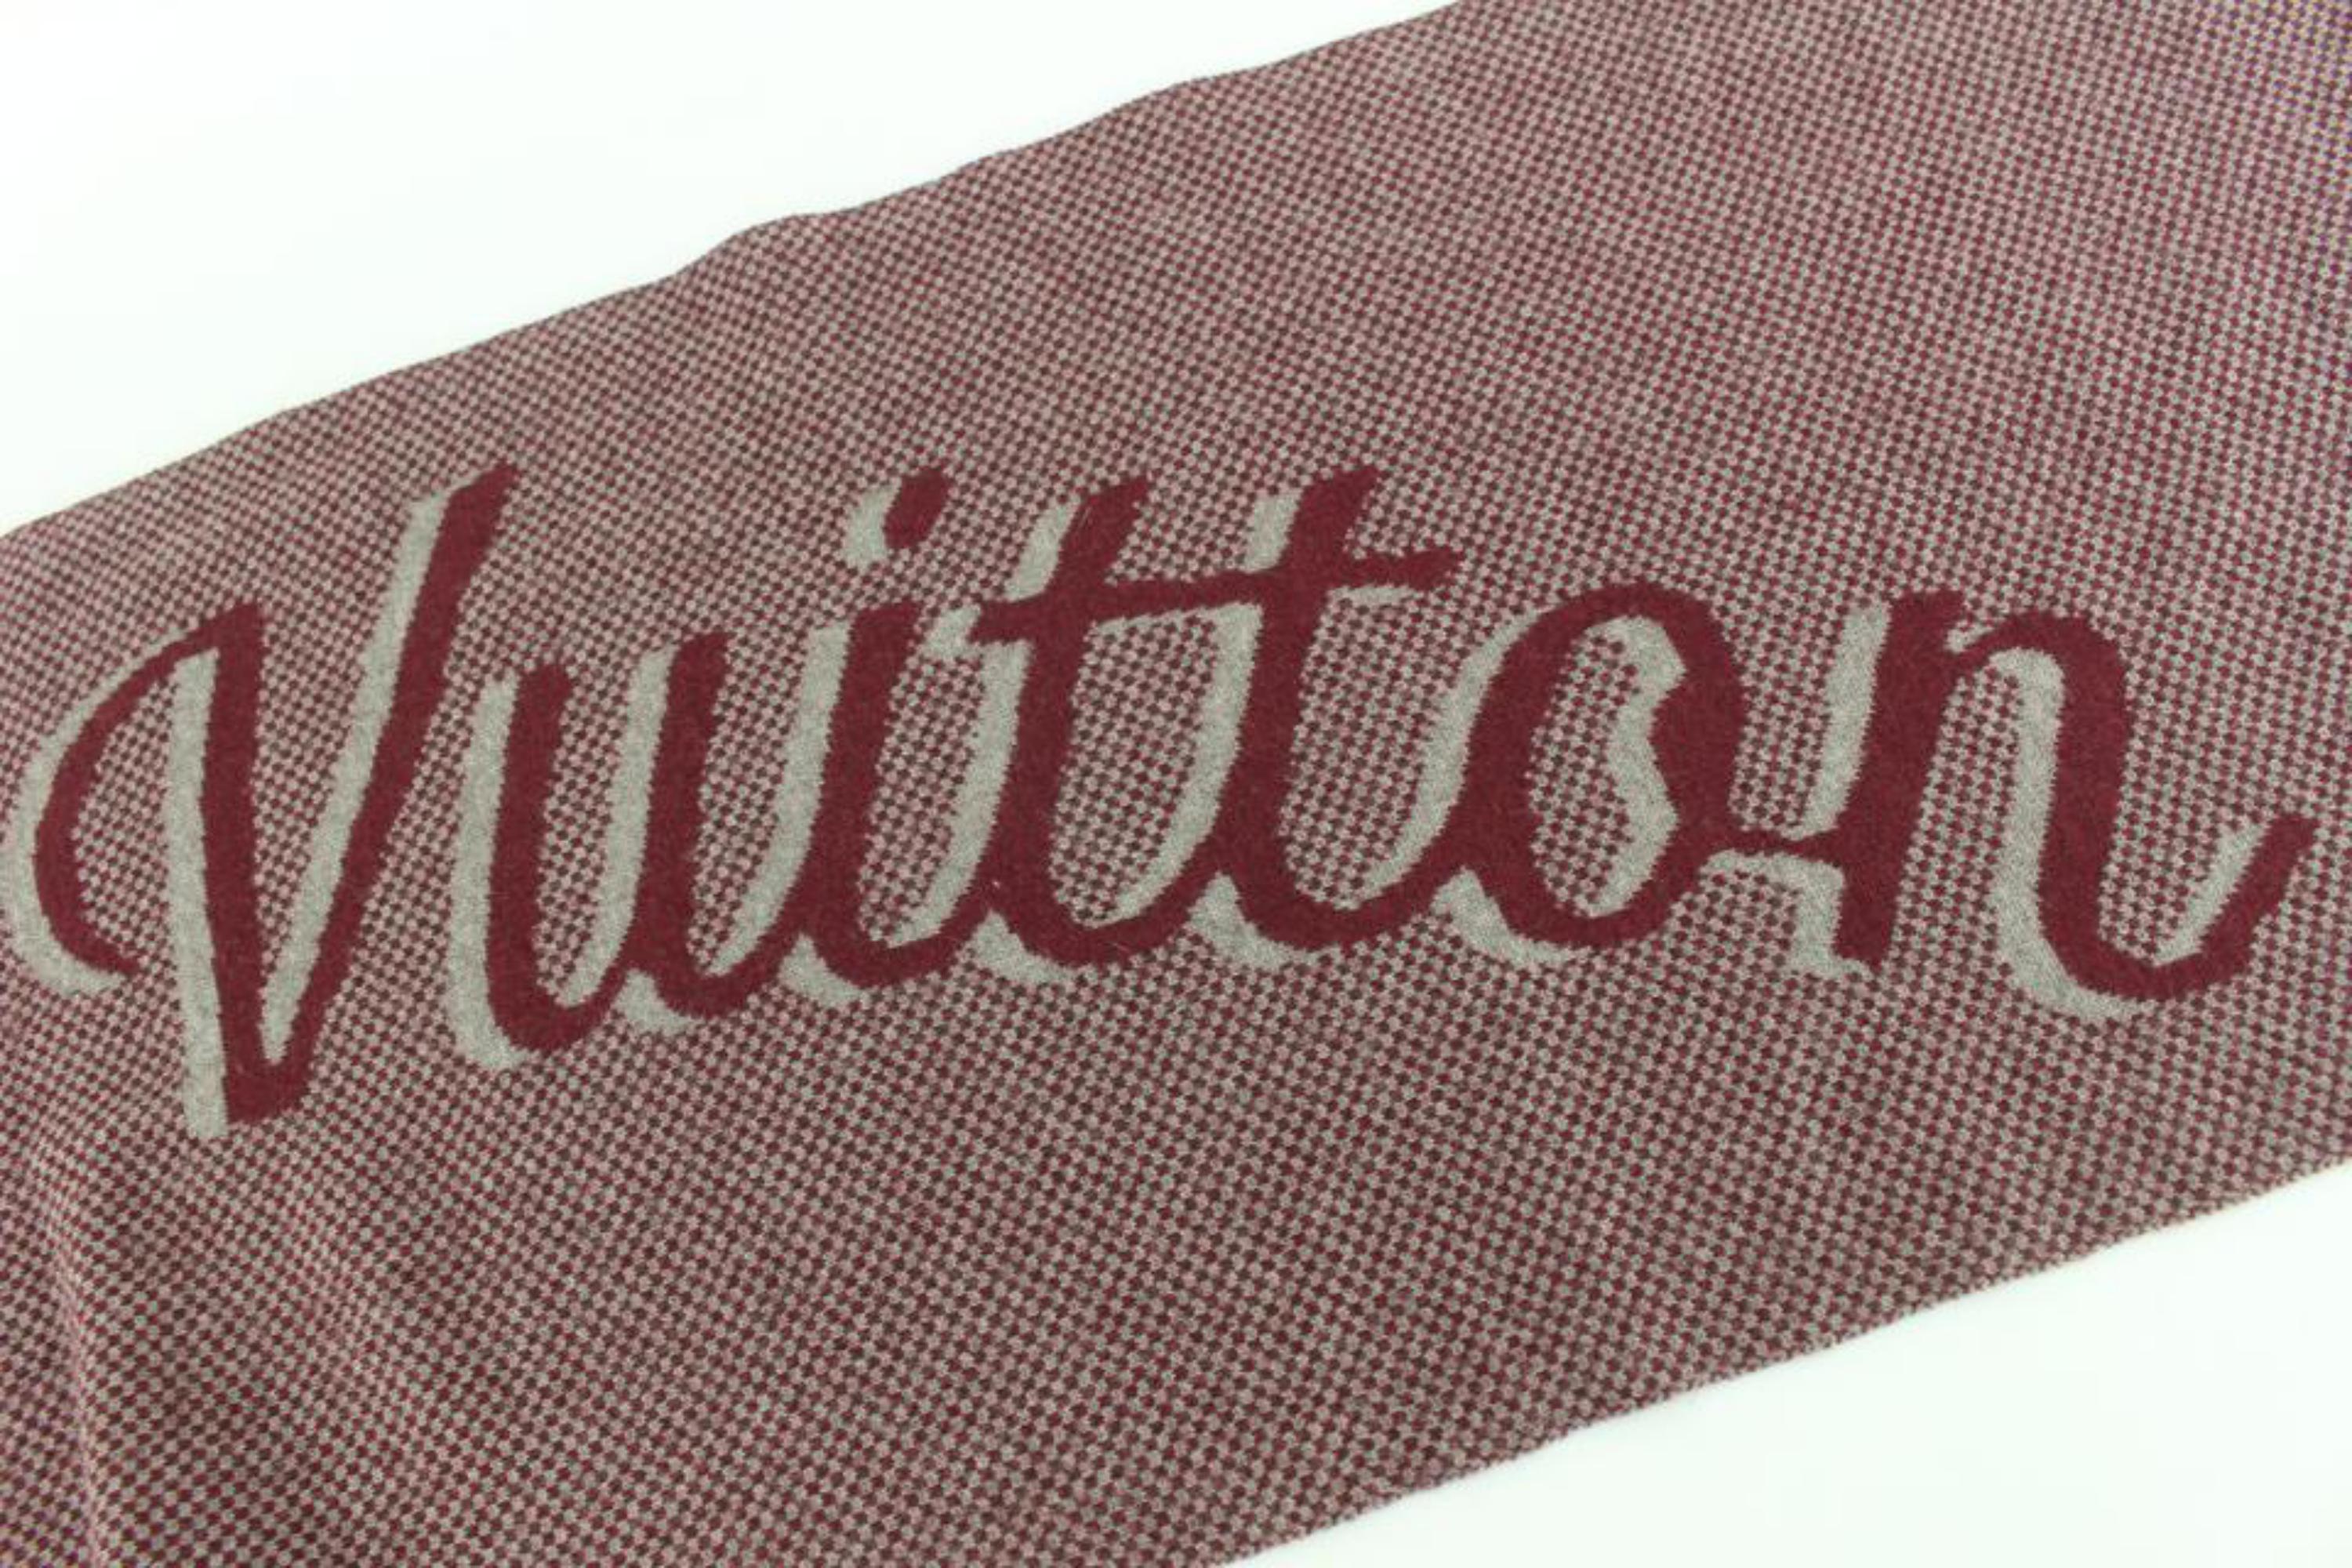 Louis Vuitton Handwriting Burgundy Scarf 4lk830s In Excellent Condition For Sale In Dix hills, NY